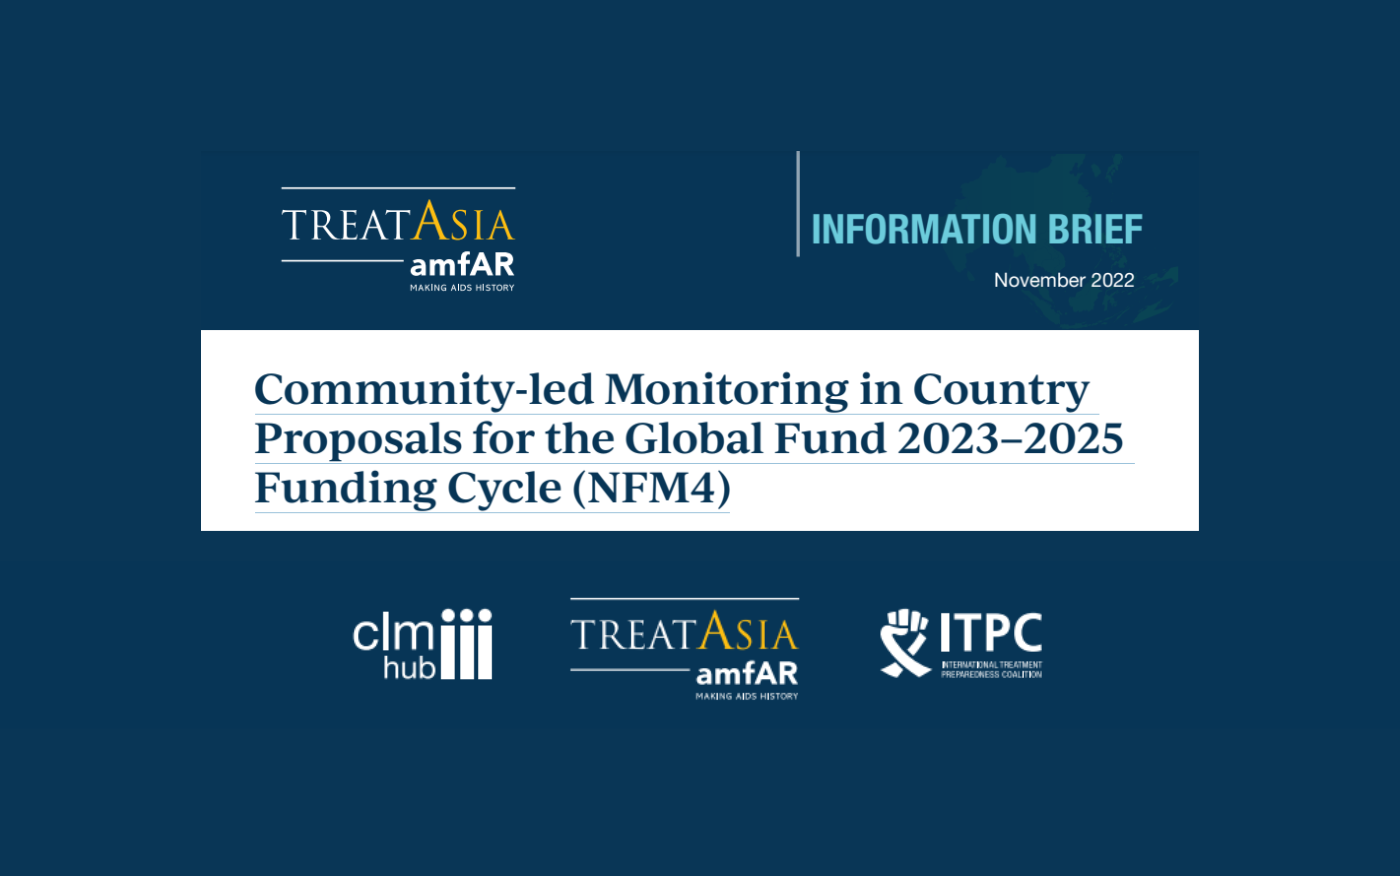 Community-led Monitoring in Country Proposals for the Global Fund 2023-2025 Funding Cycle (NFM4) Information Brief